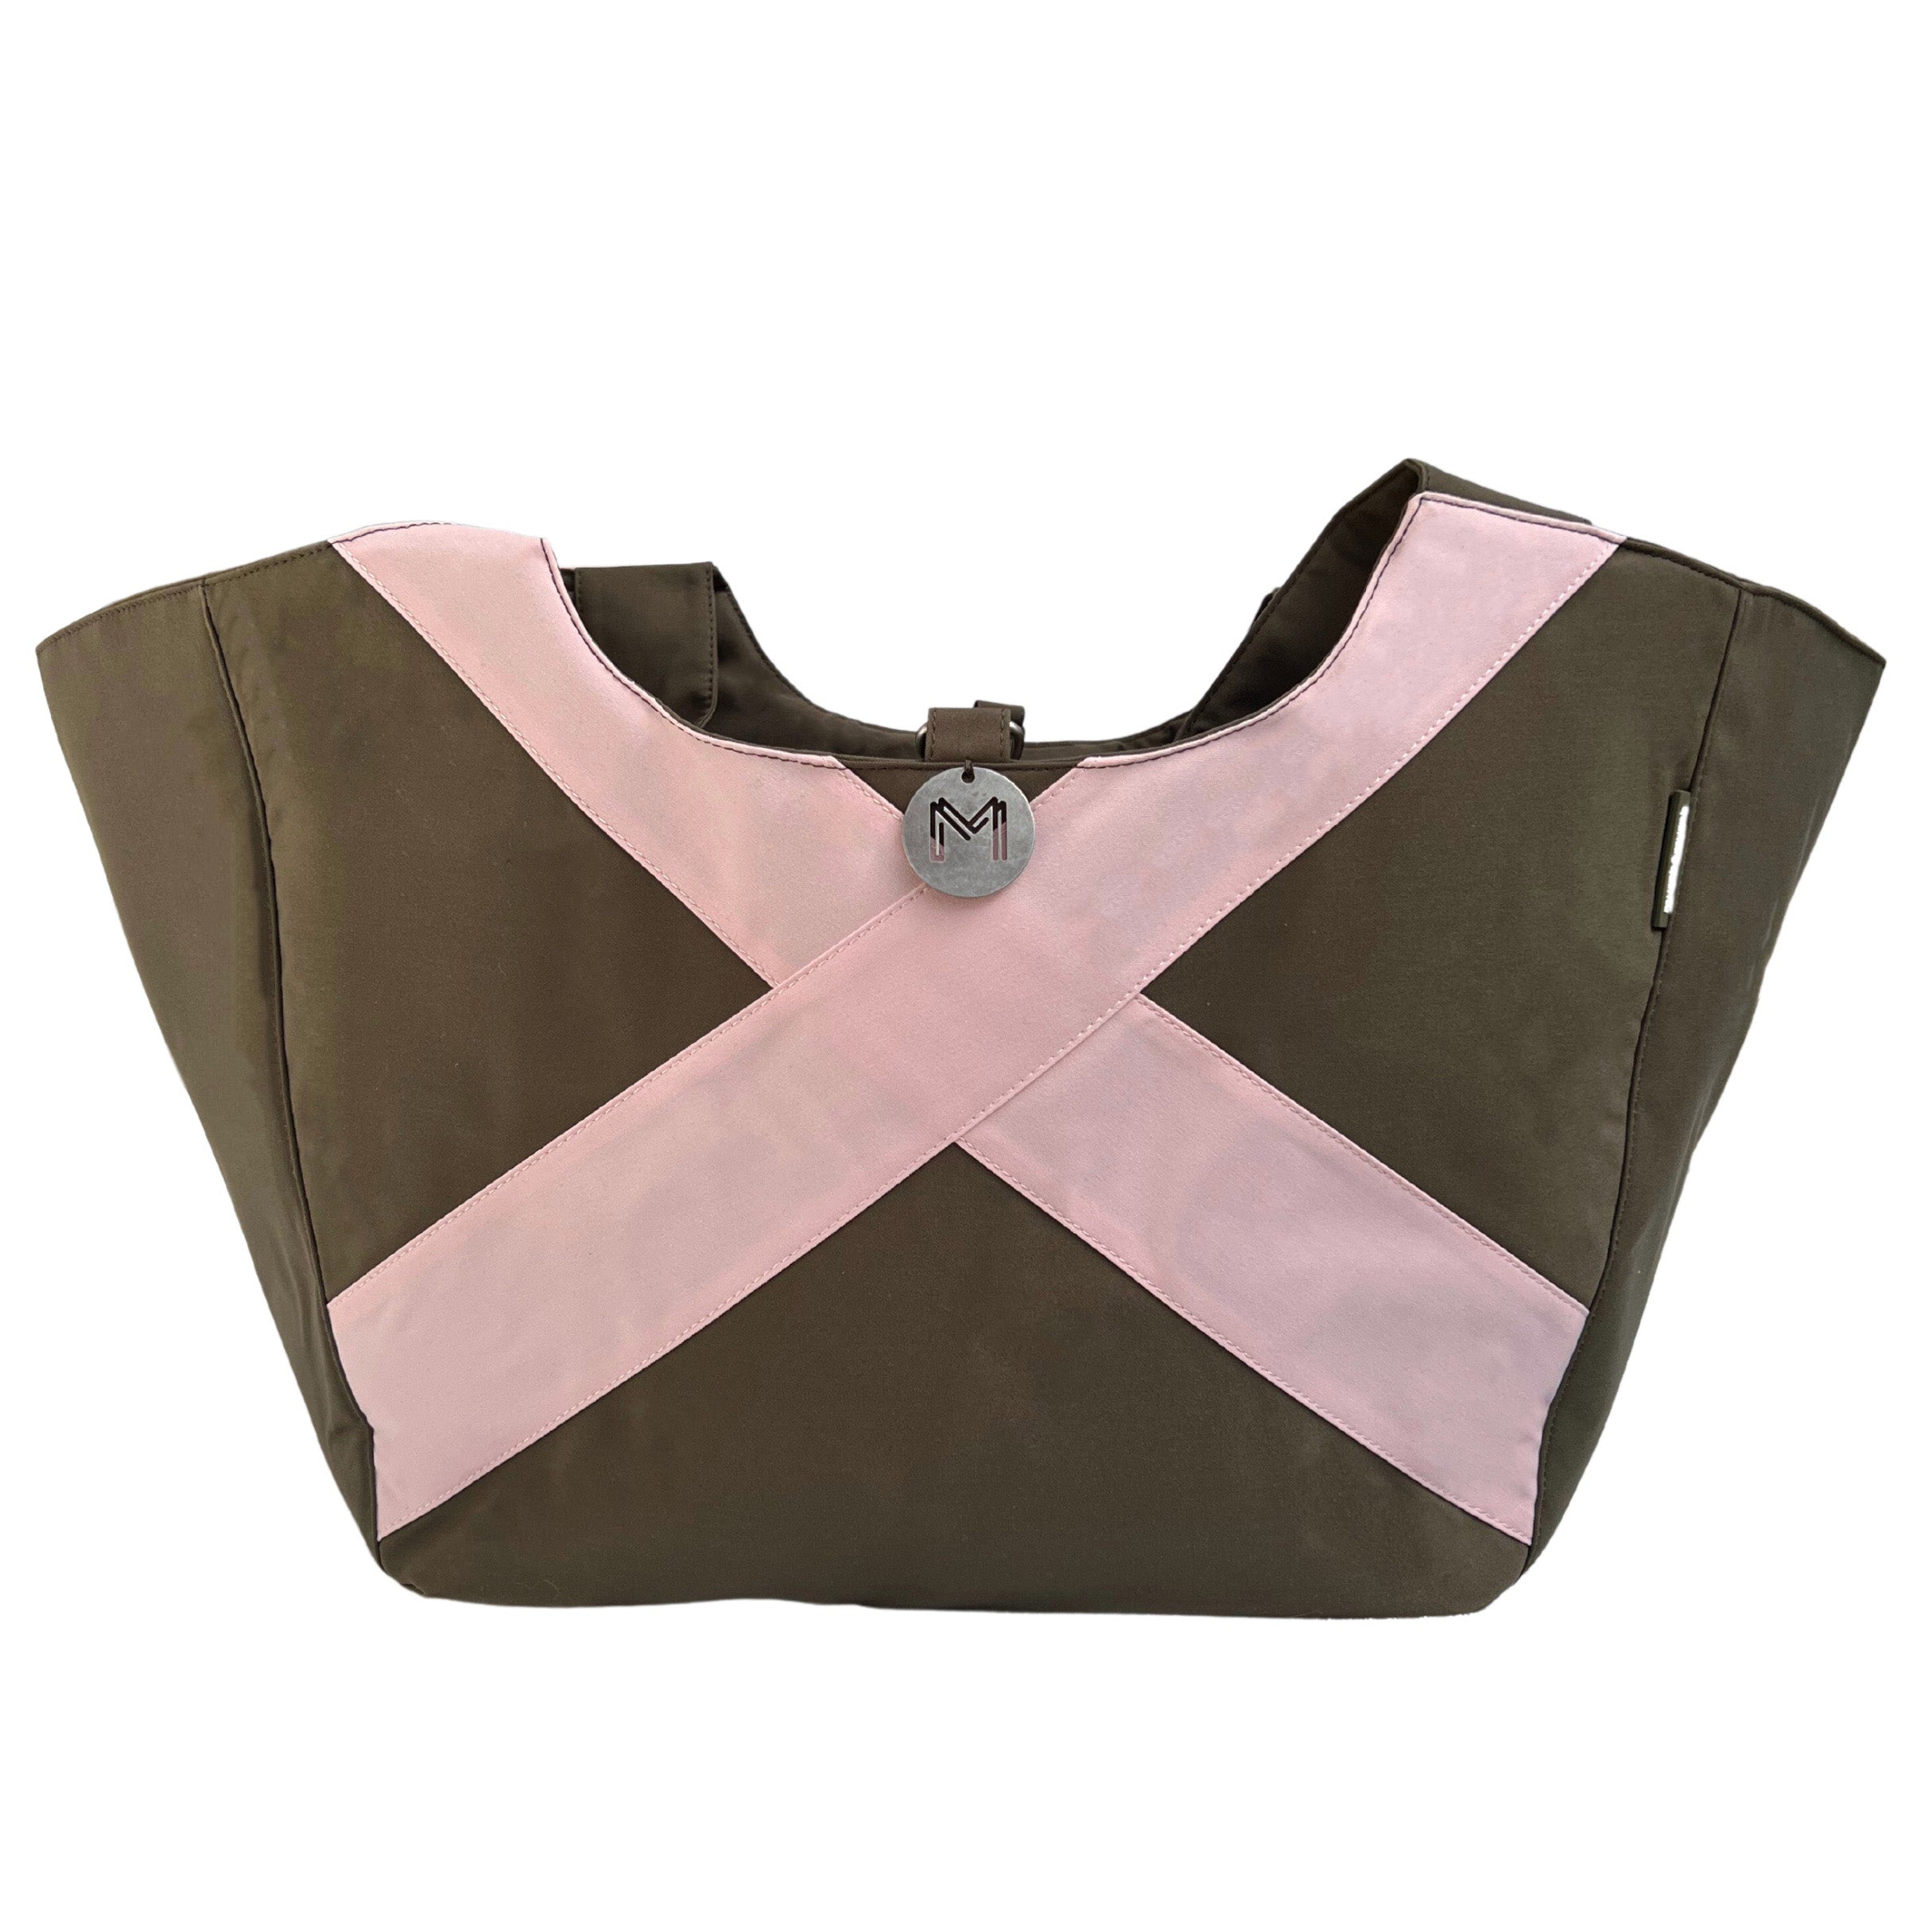 Cove Carry-All - Khaki with Pastel Pink Cross (ONLY 2 LEFT)